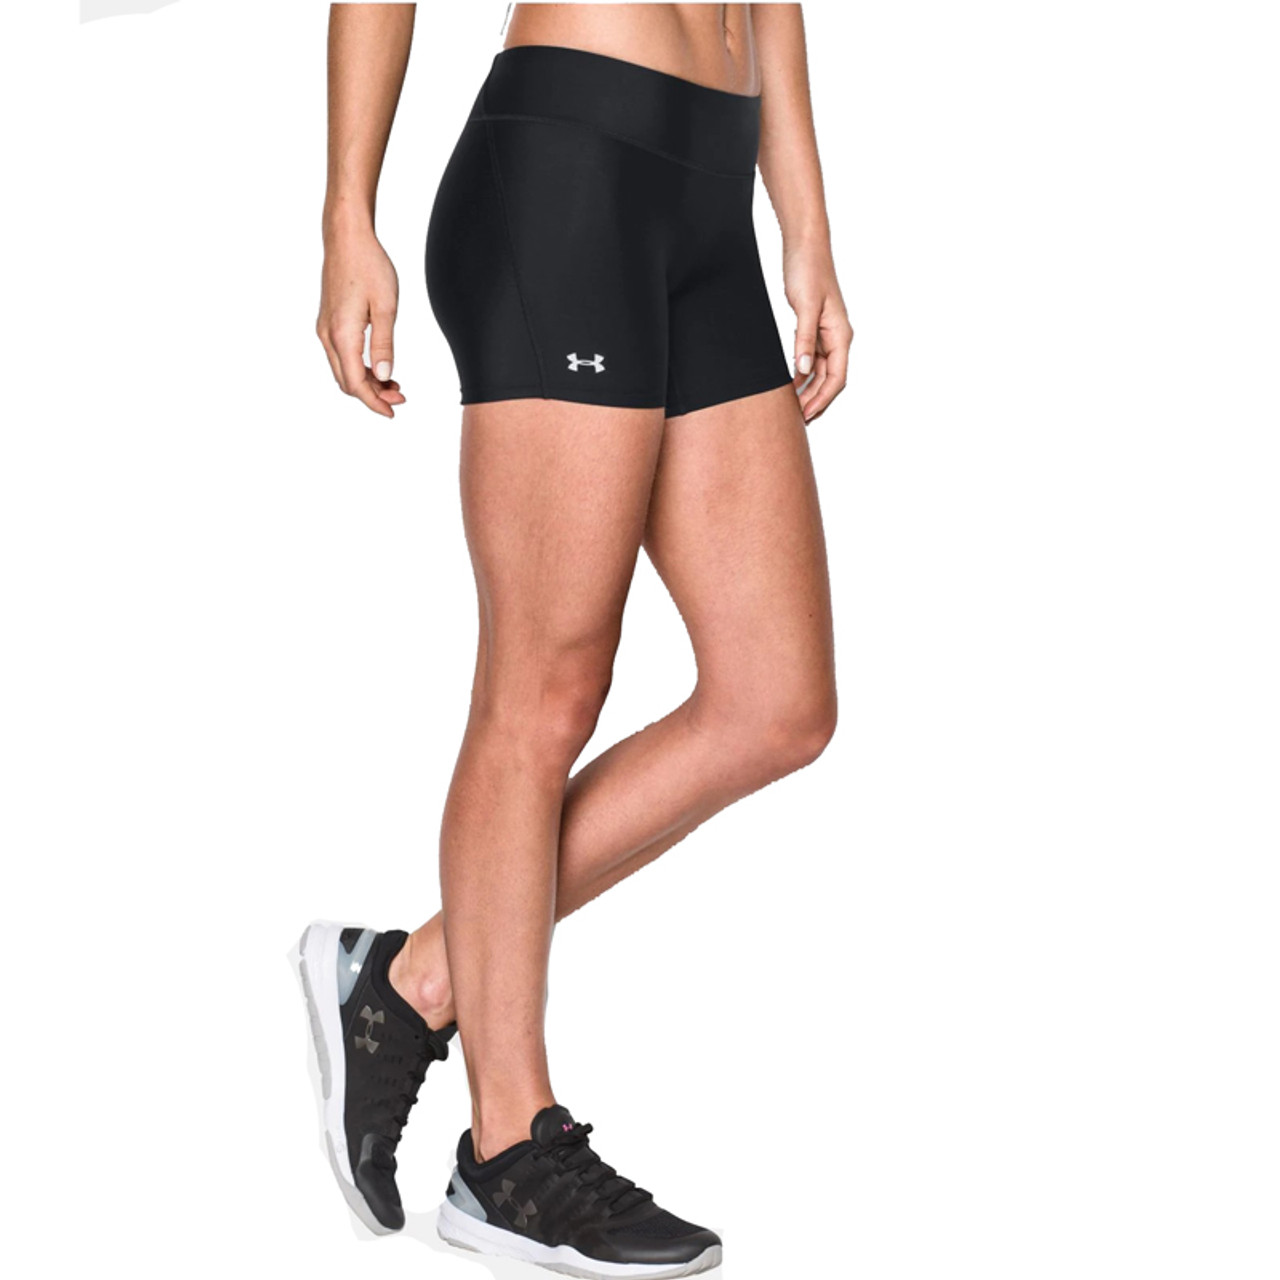 AUTHENTIC 4 COMPRESSION SHORT - Sports Contact